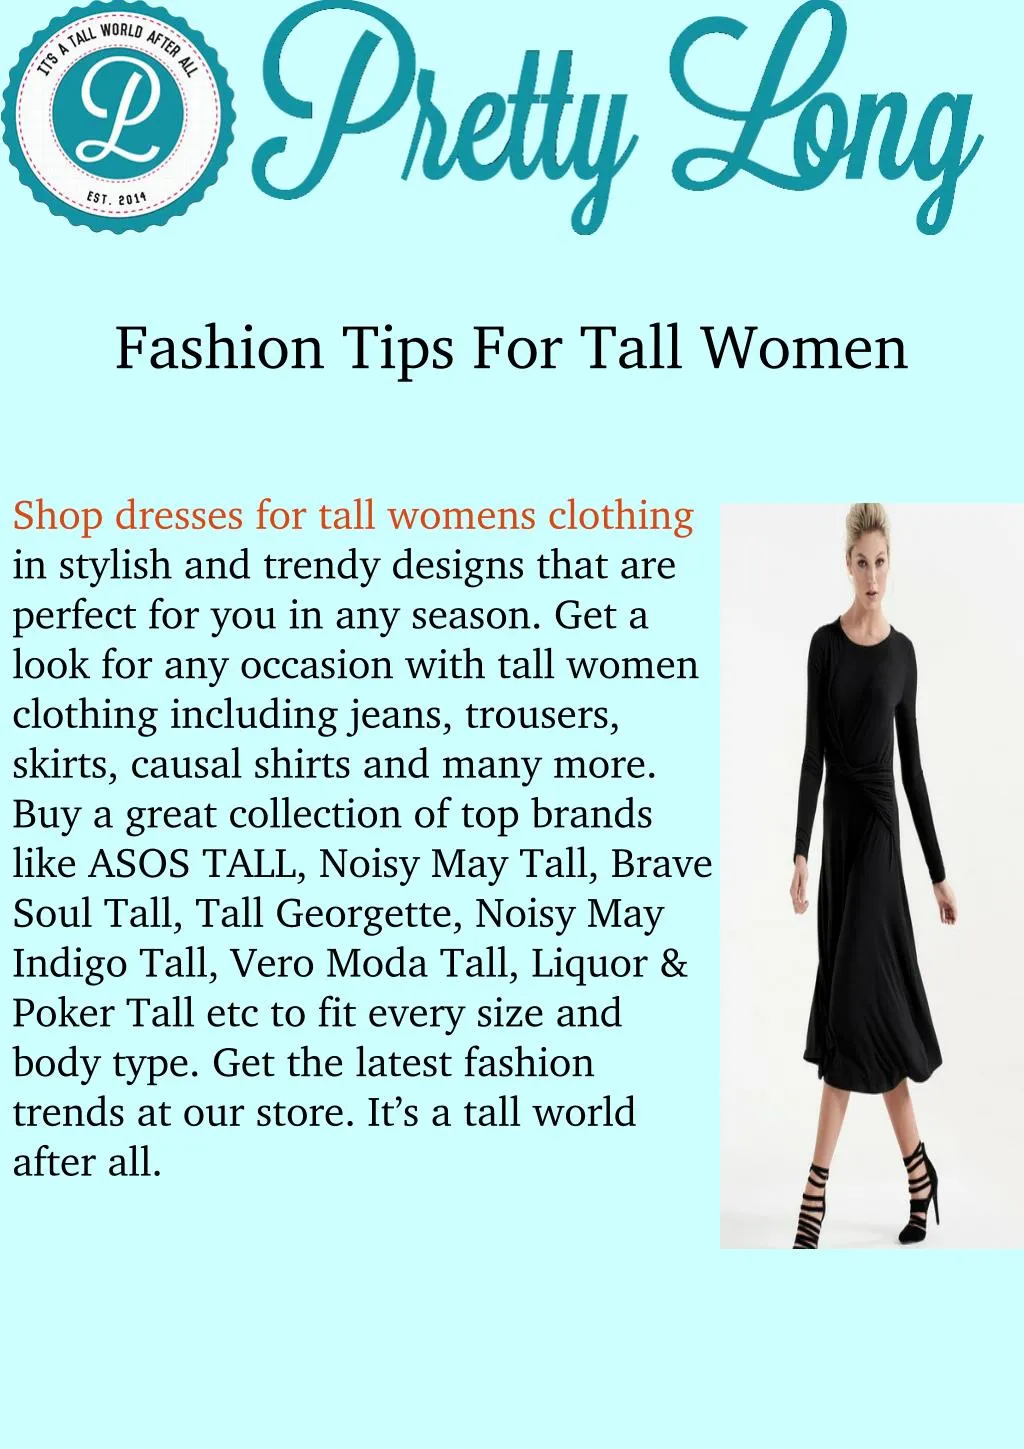 fashion tips for tall women